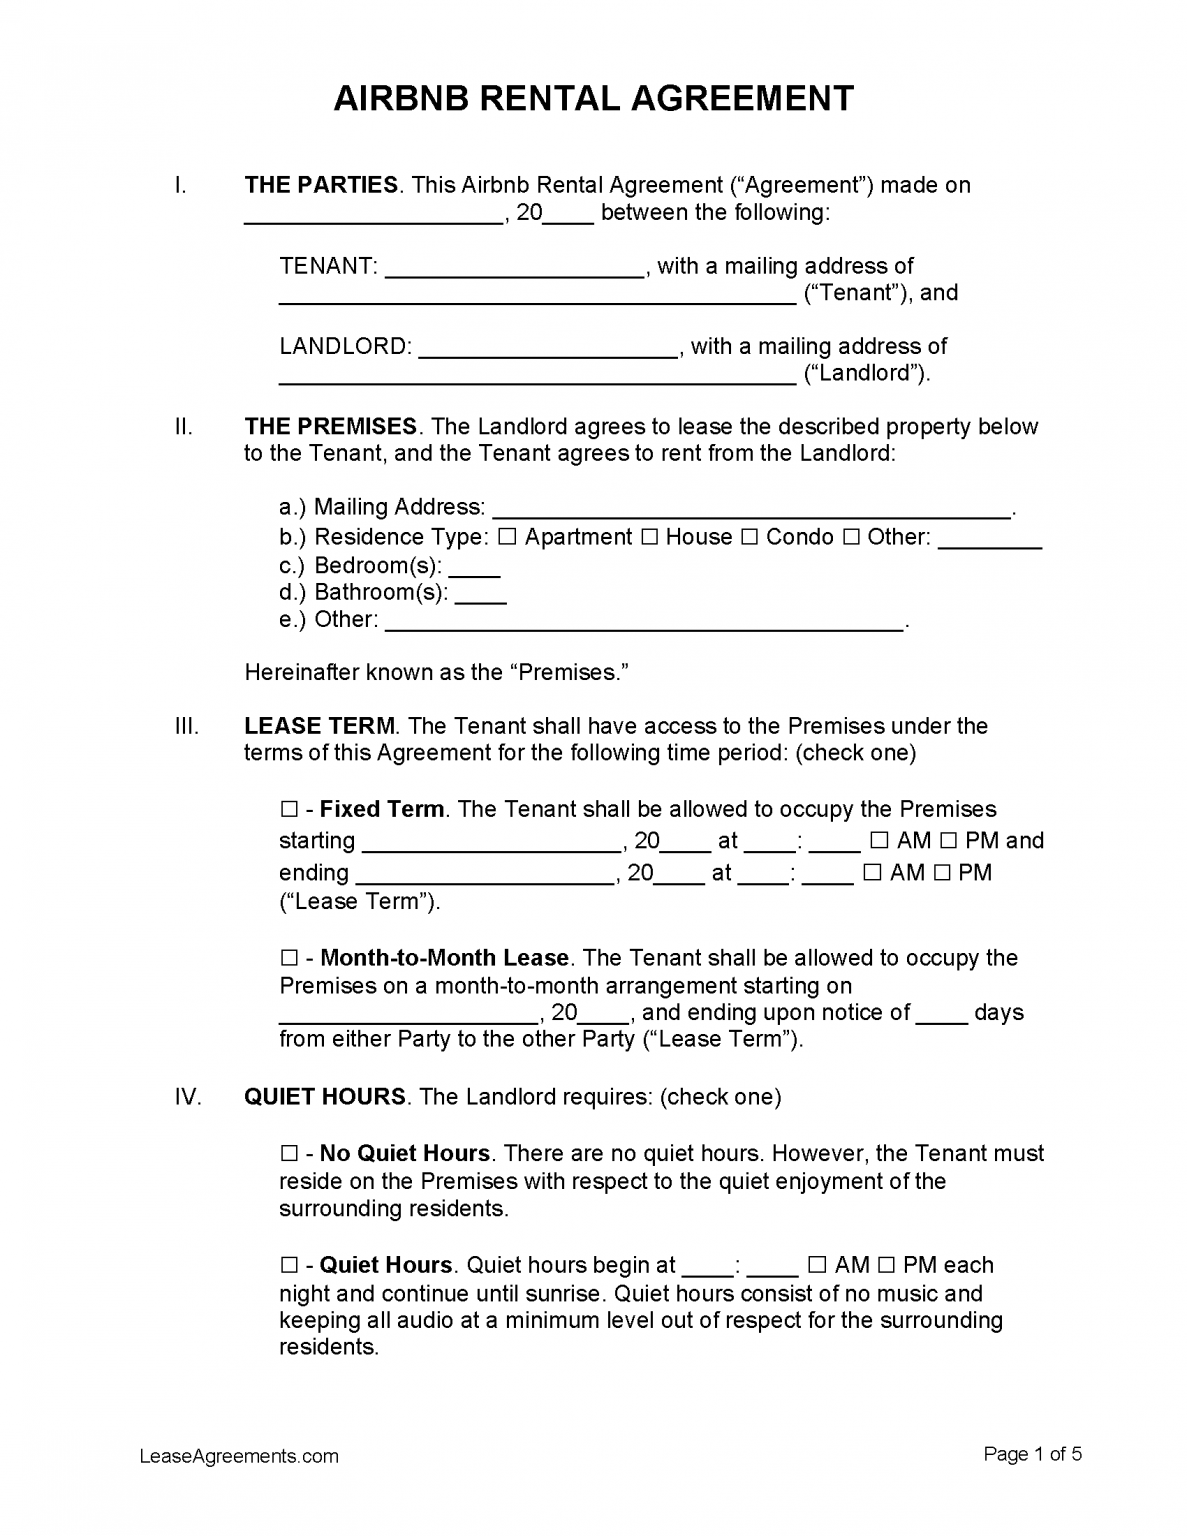 airbnb-rental-lease-agreement-template